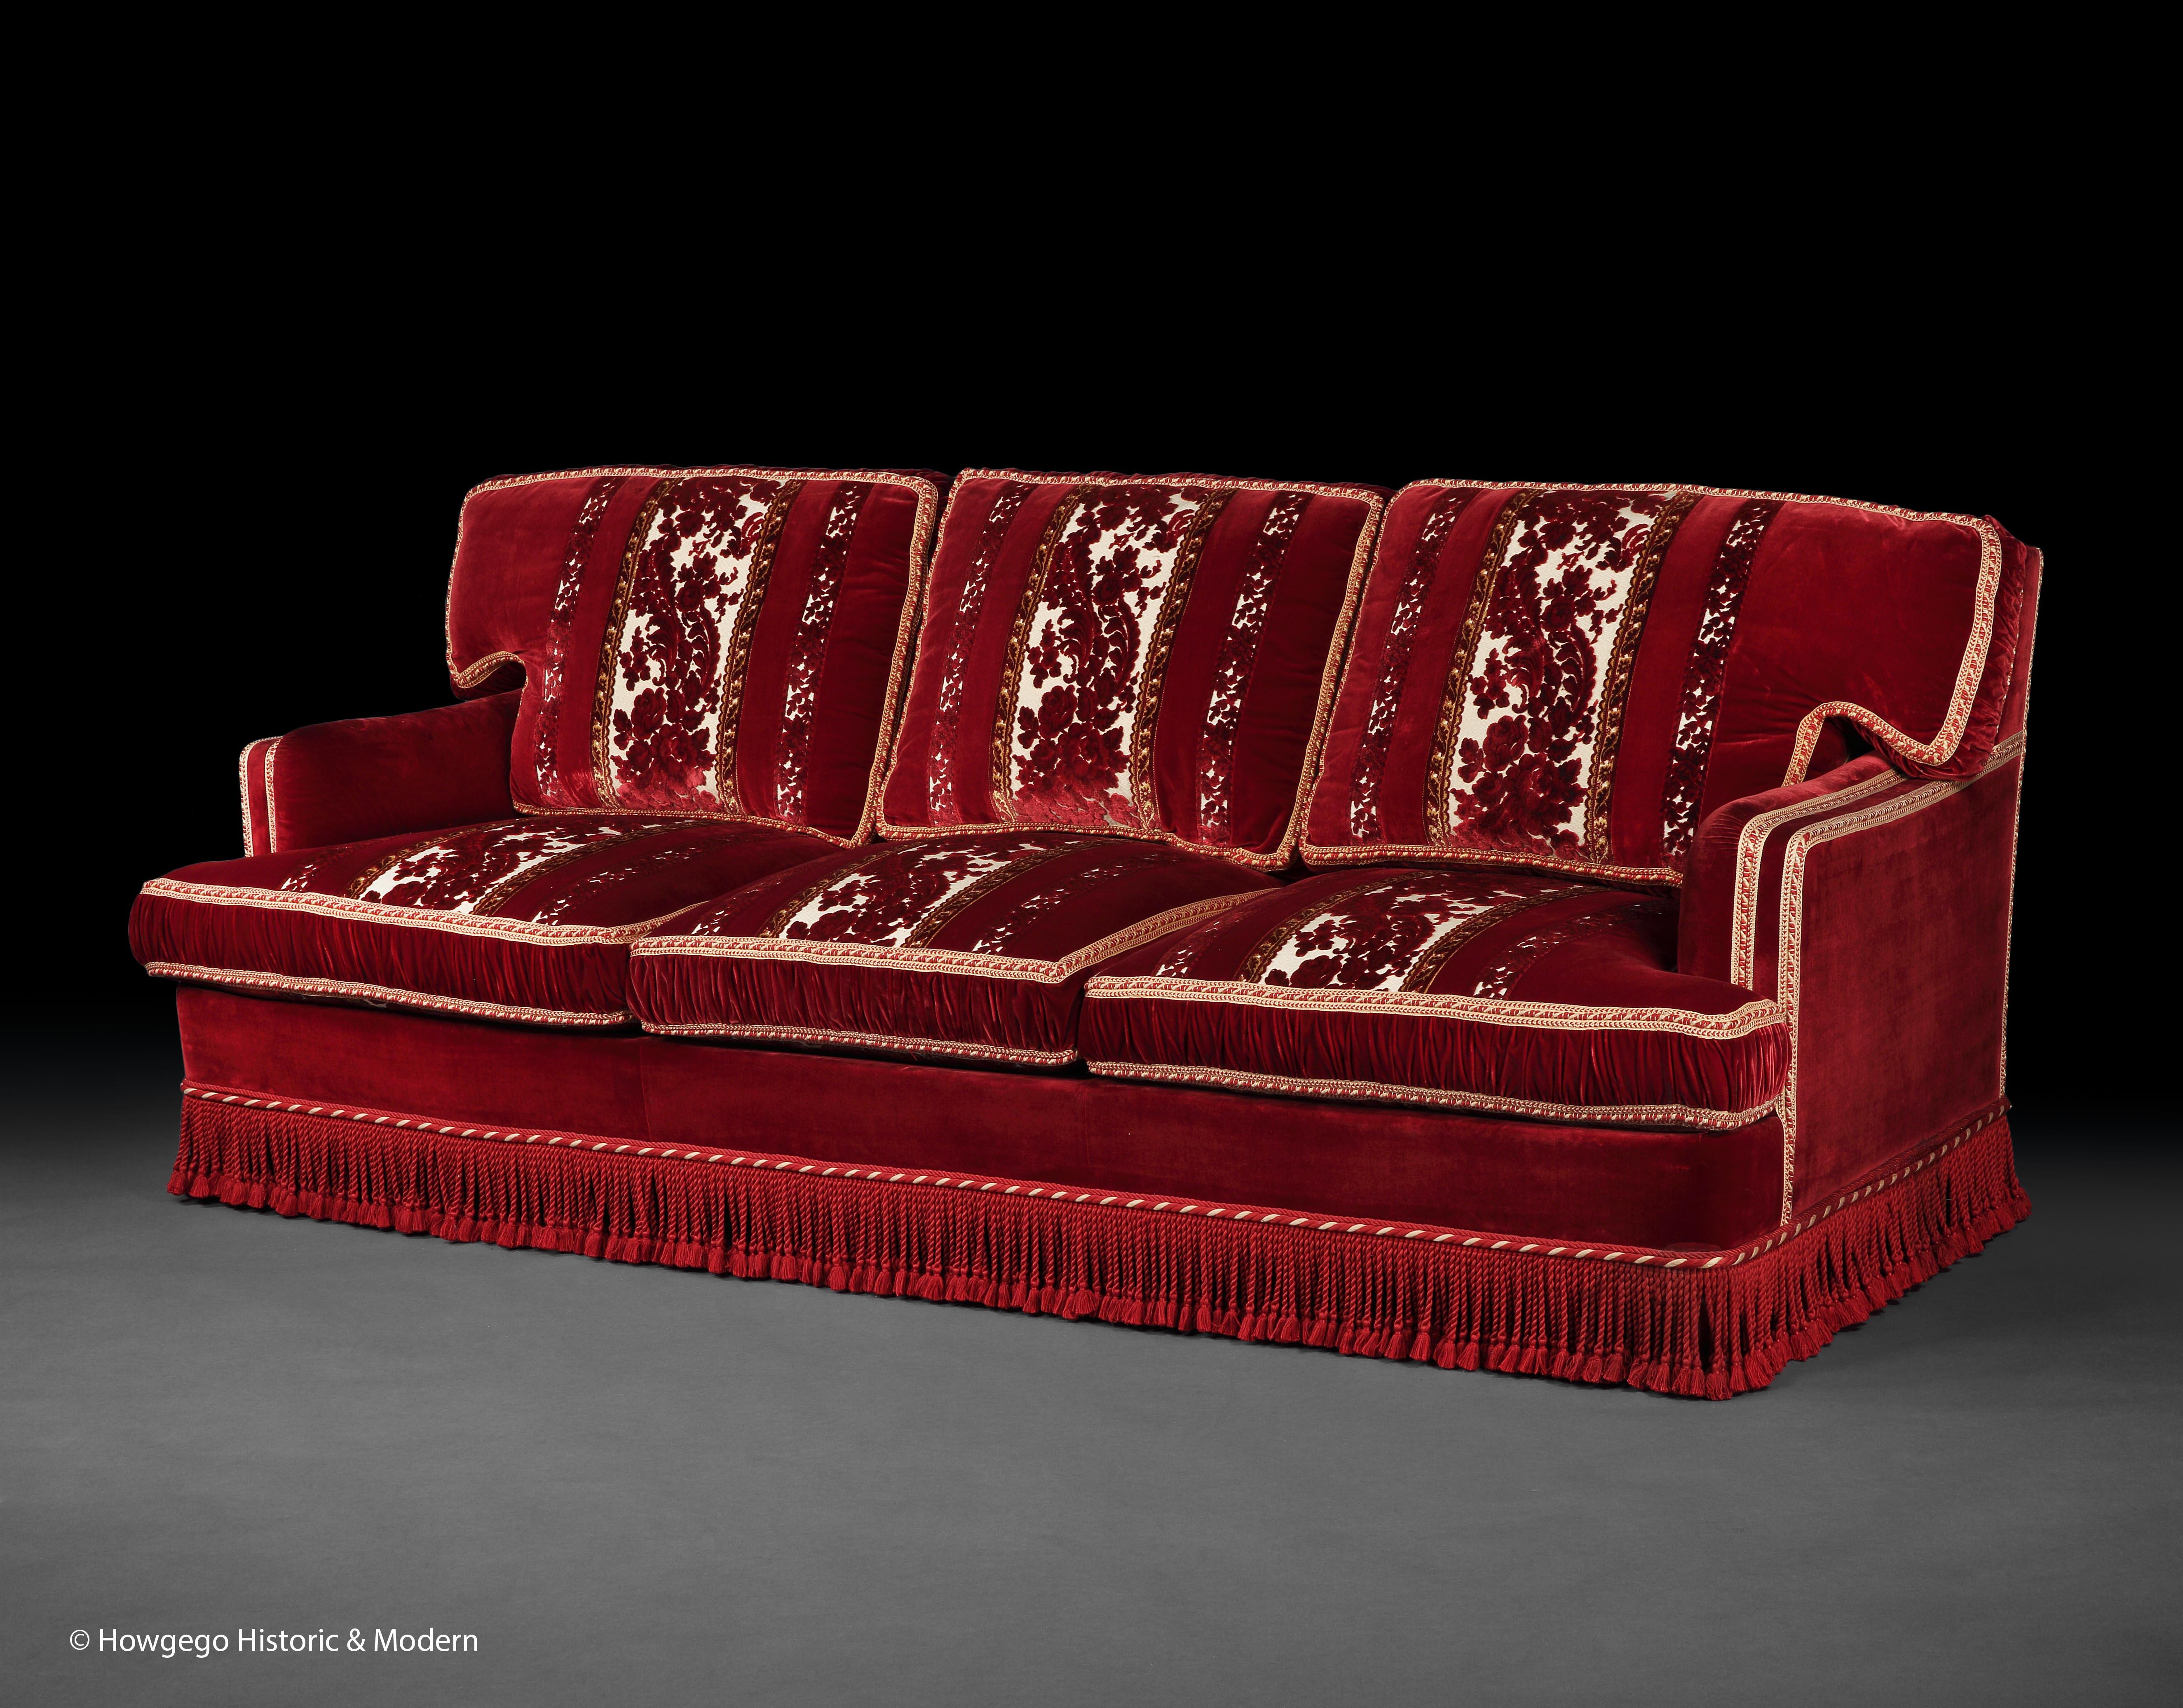 An opulent, cut-velvet, three seater sofa, by Italian architect & designer Toni Facella Sensi della Penna

This sofa epitomises elegance, opulence and comfort which characterise the interiors and pieces supplied and sourced by Facella Sensi della